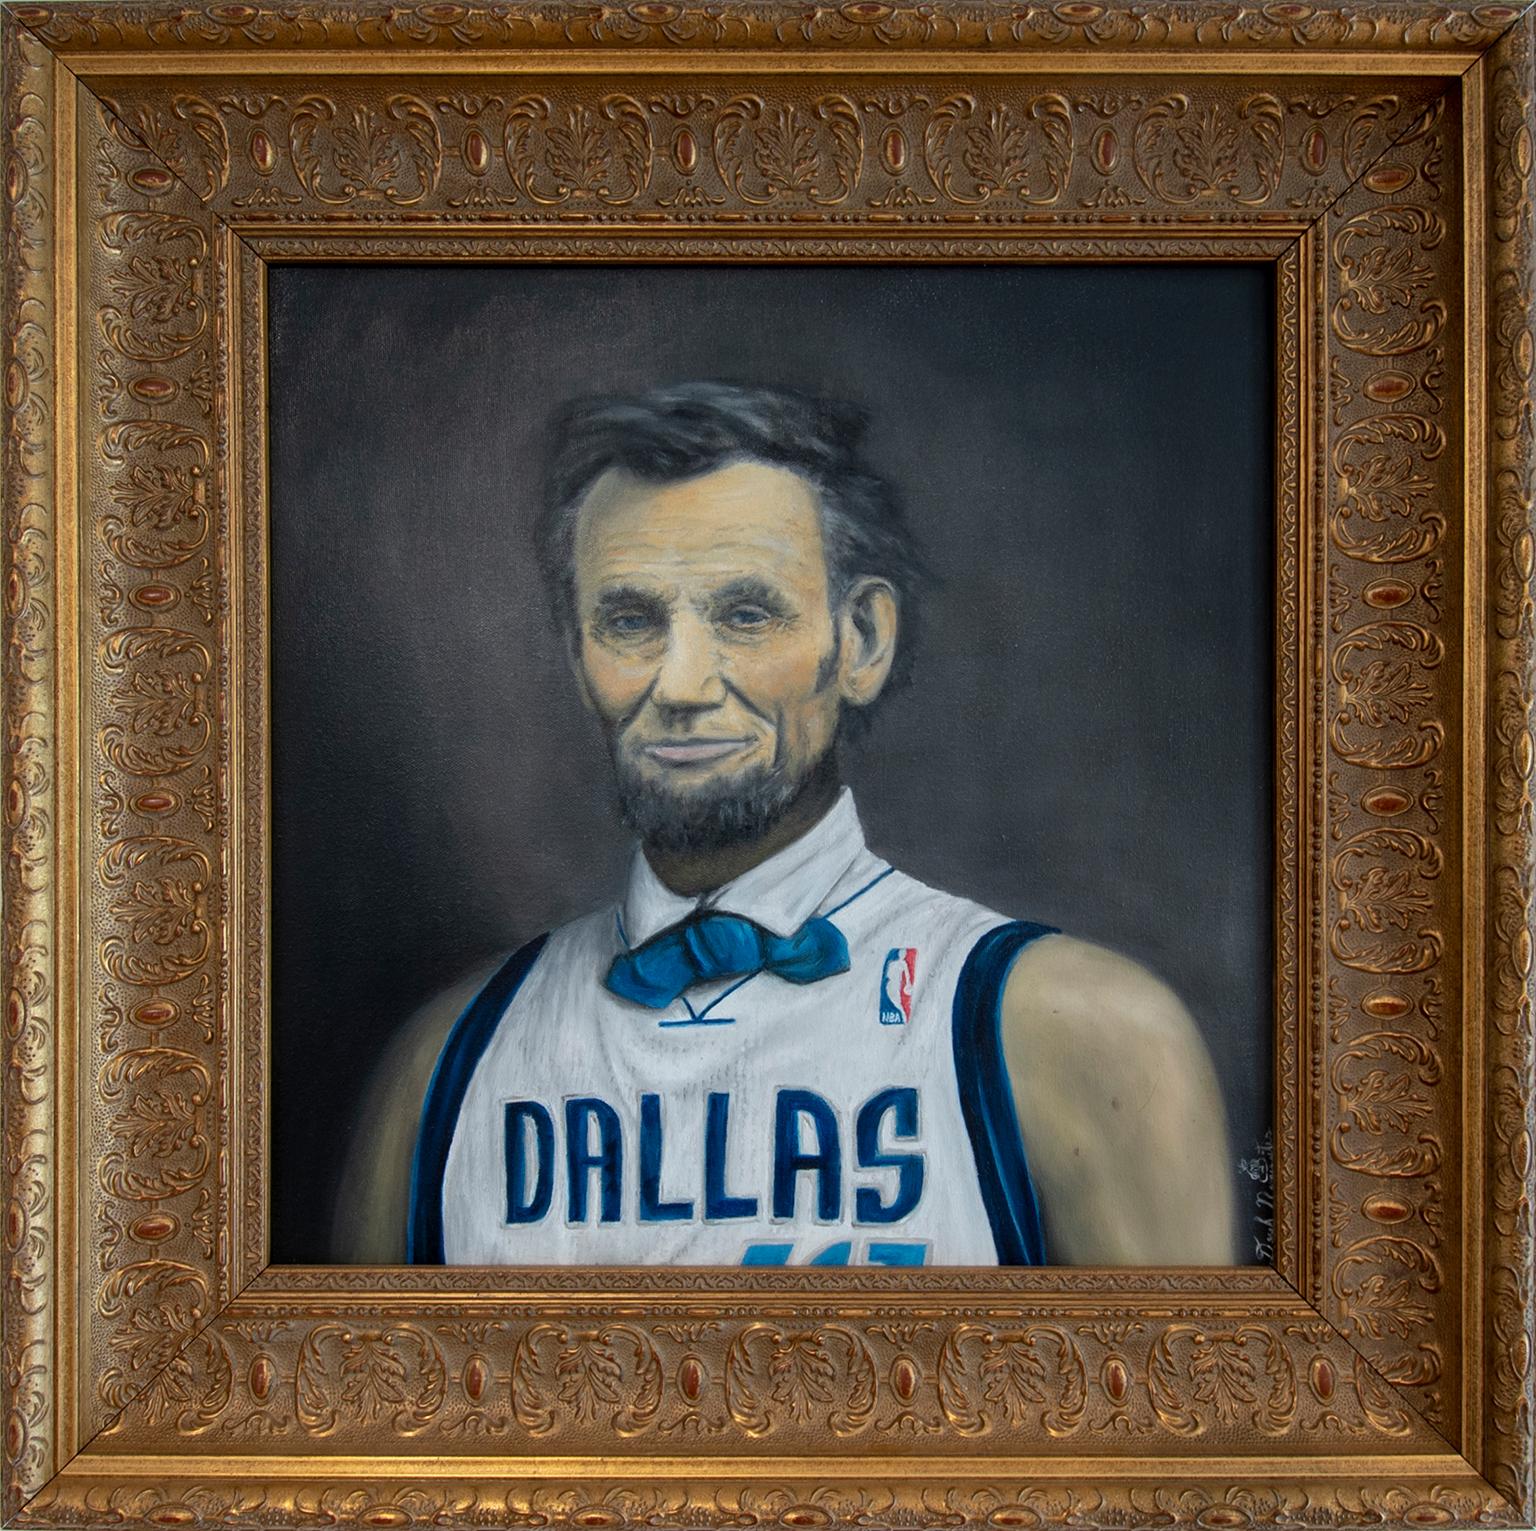 MVP #41 by Derek Nemunaitis
Oil on Canvas. Original
18 x 18 inches Unframed
Framed size 24 x 24 inches.

Viewers of MVP #41 can likely tell the artist is a Dirk Nowitzki fan and wanted to highlight his greatness by showing that Abraham Lincoln would